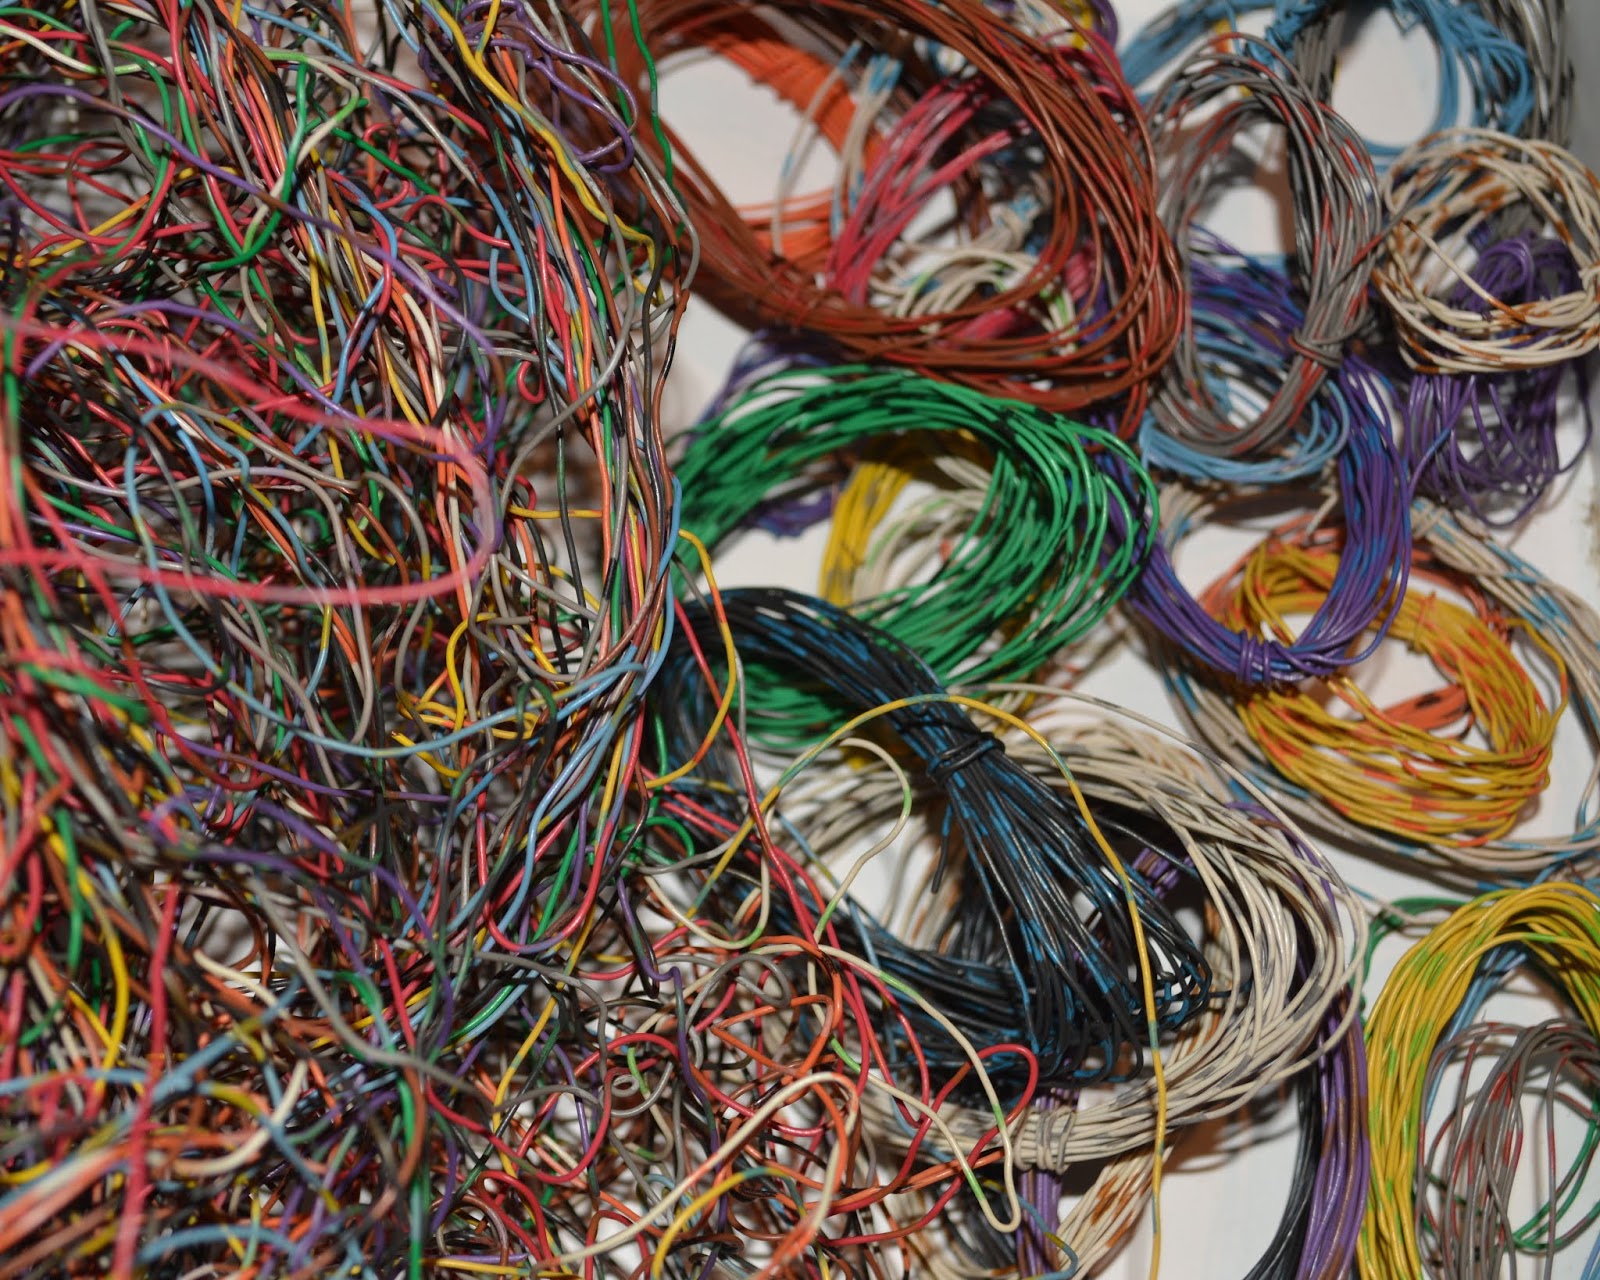 Don't Eat the Paste: The tangle of telephone wire